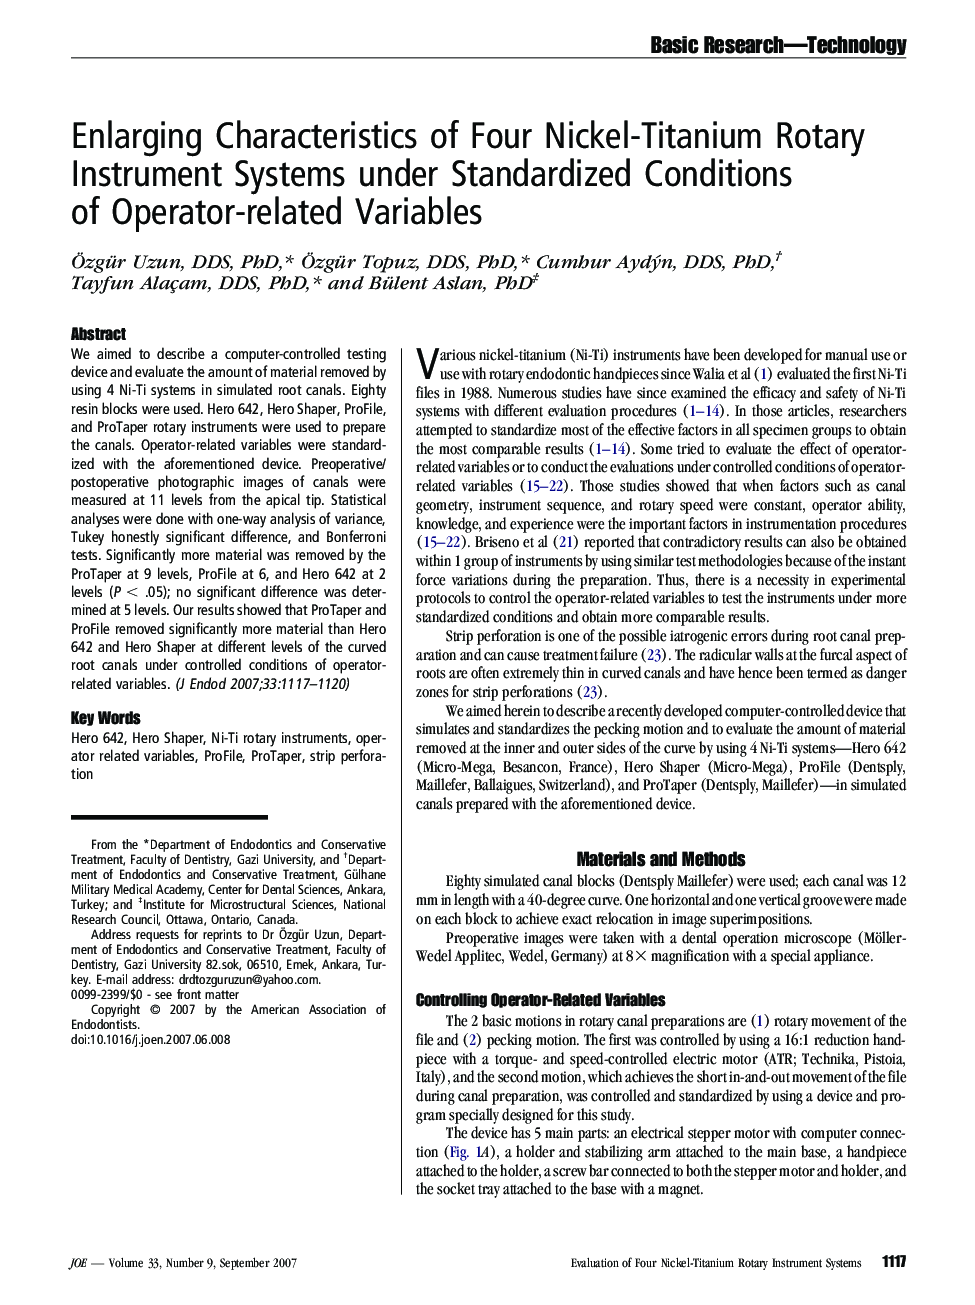 Enlarging Characteristics of Four Nickel-Titanium Rotary Instrument Systems under Standardized Conditions of Operator-related Variables